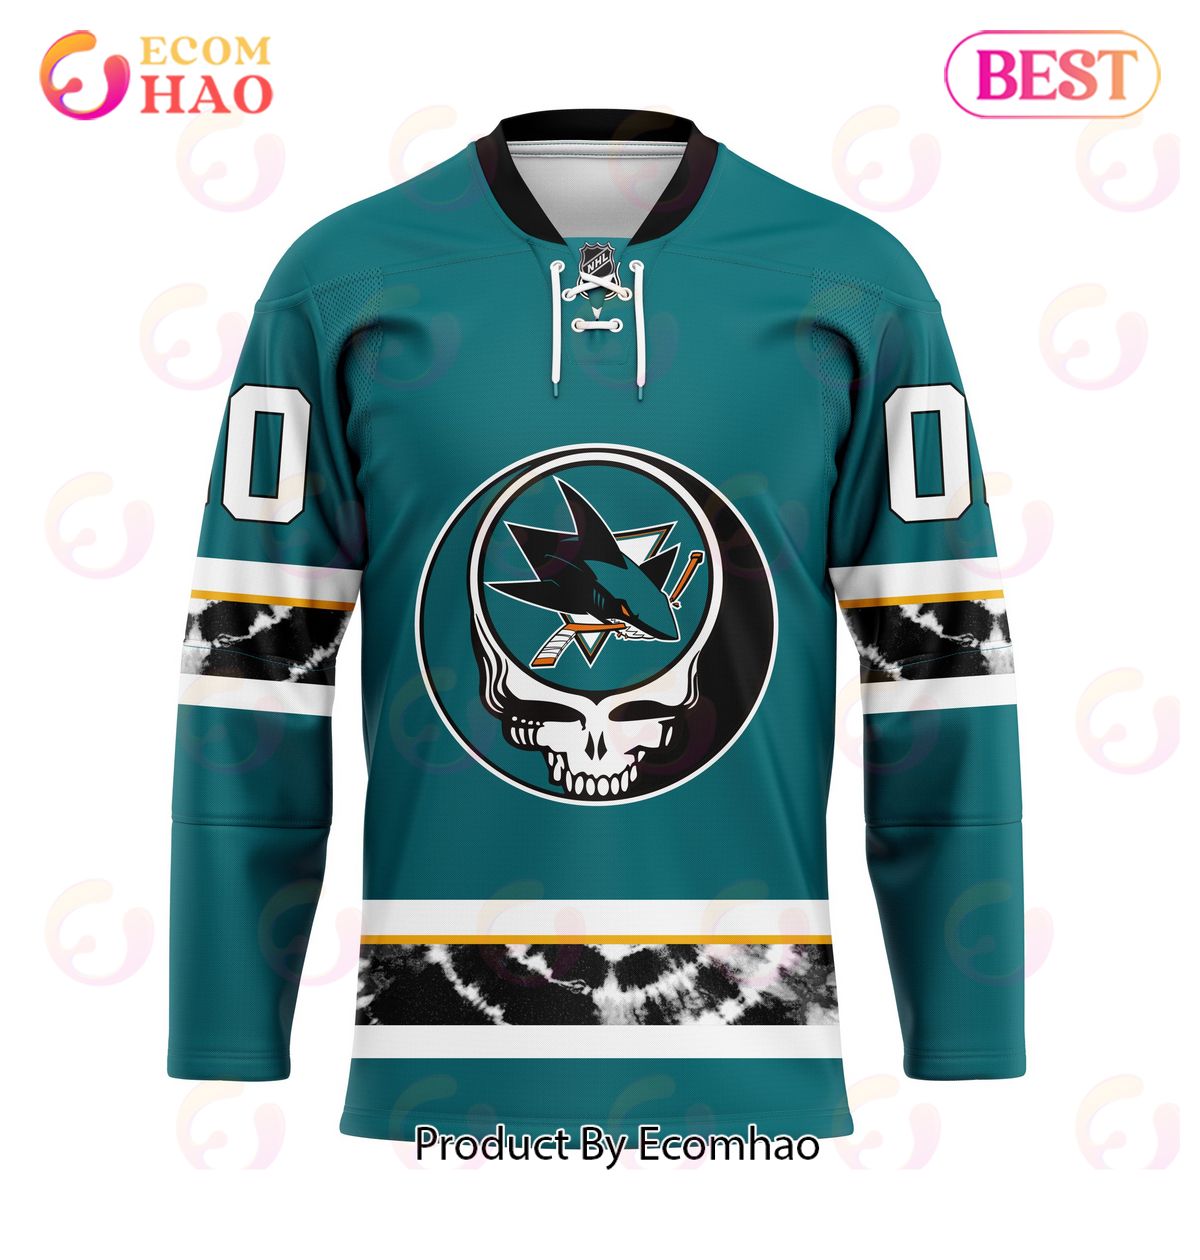 Grateful Dead & San Jose Sharks Hockey Jersey Personalized Name & Number